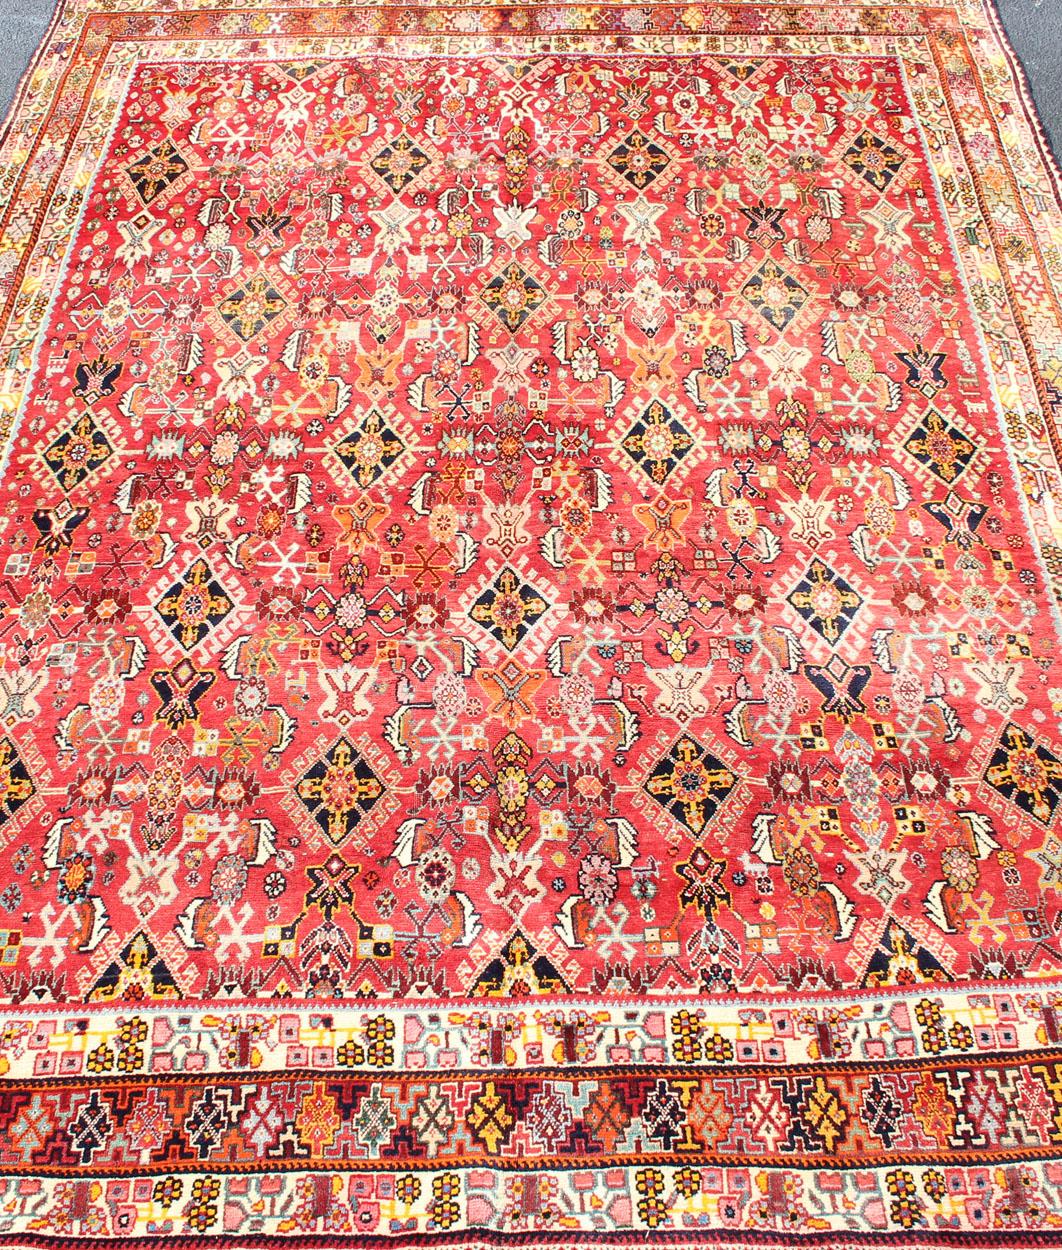 20th Century Vintage Shiraz/Qashgai Persian Rug in All-Over Design in Red and Multi-Colors